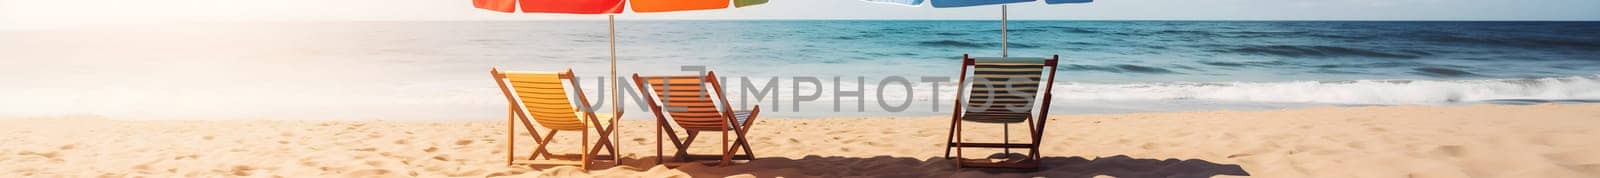 Beach umbrella with chairs on the sand beach - summer vacation theme header. Neural network generated in May 2023. Not based on any actual person, scene or pattern.